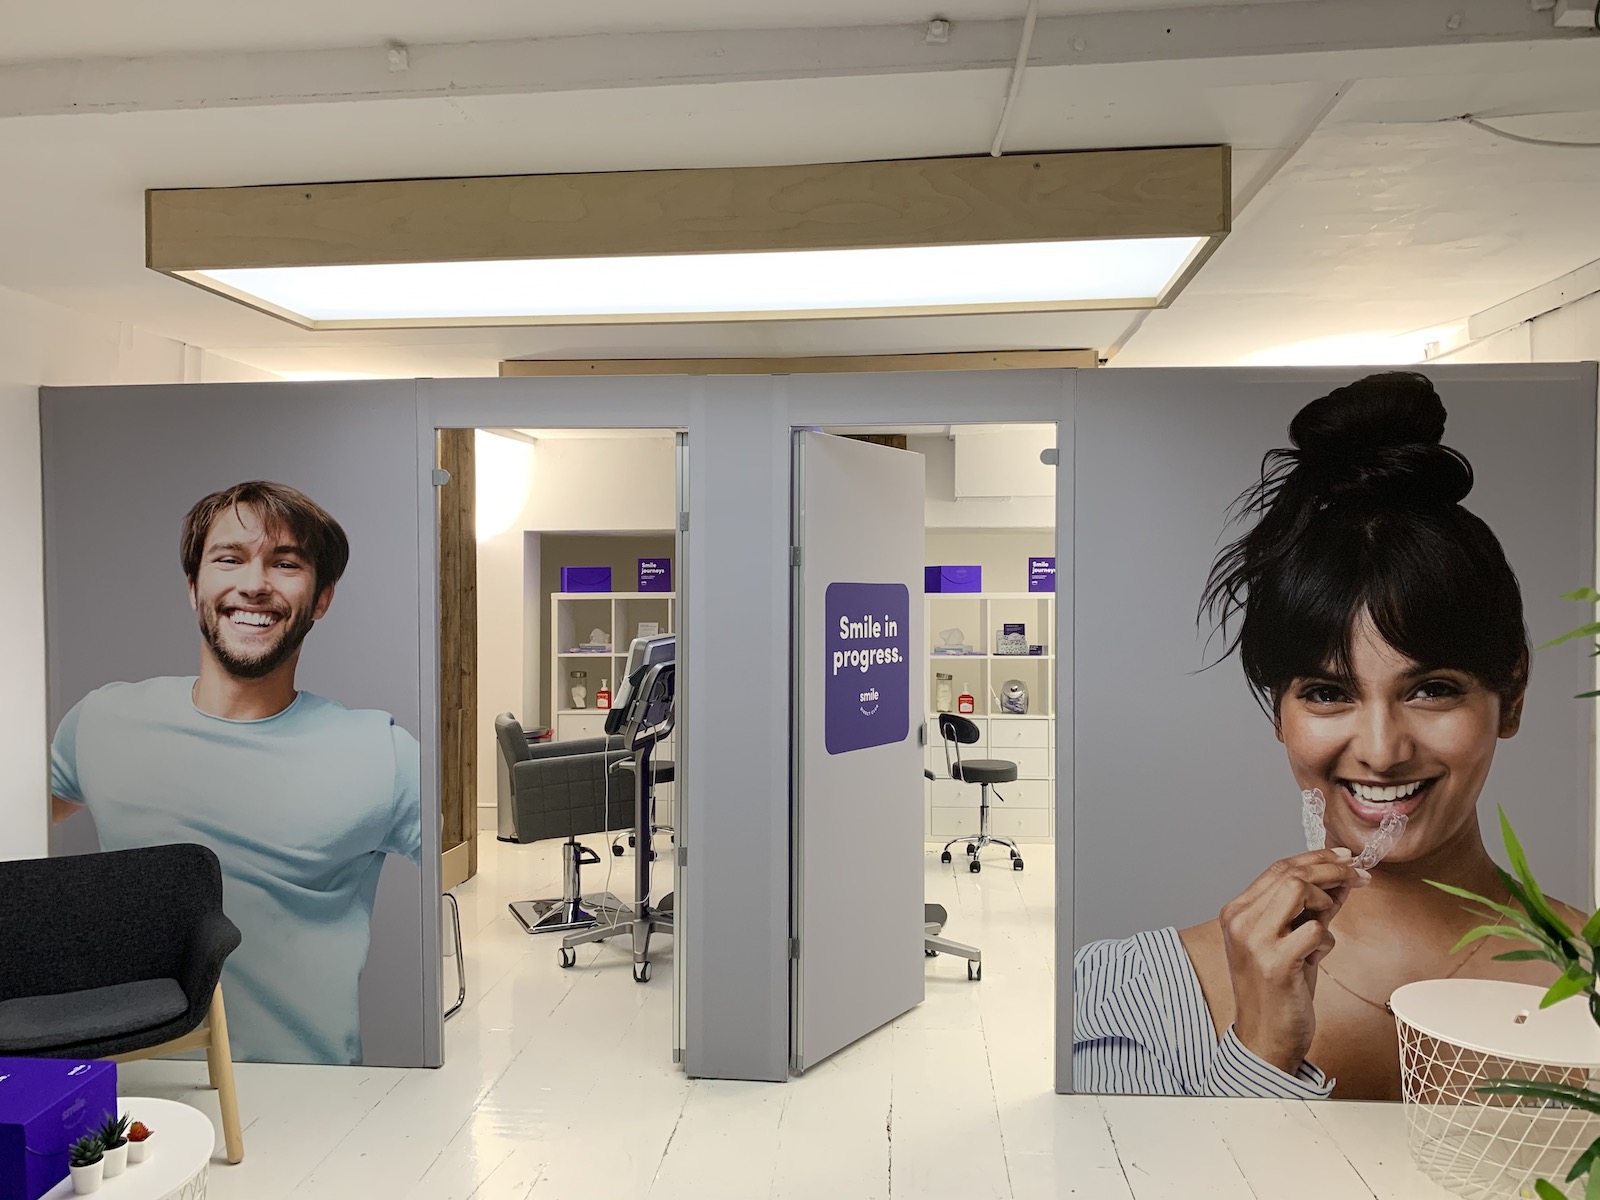 tension fabric frames with smiling people printed on